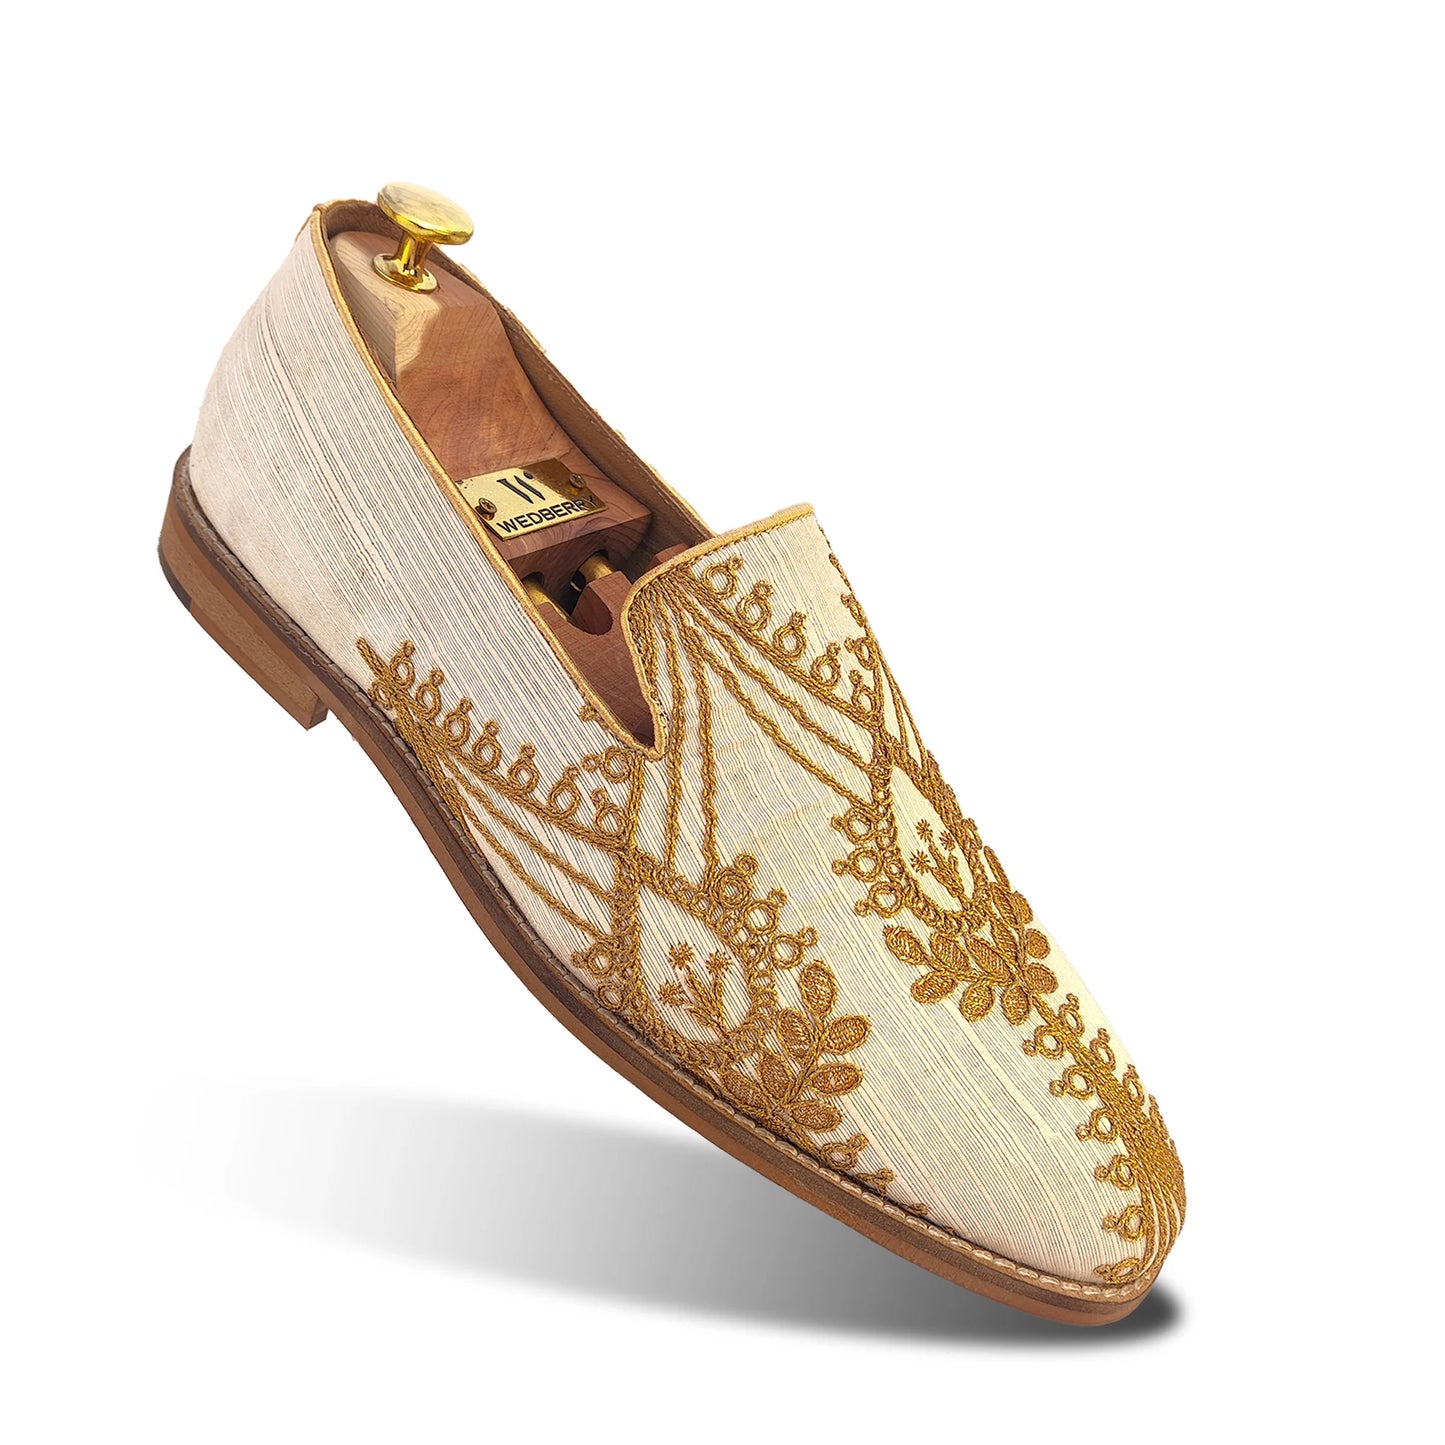 Biege with Gold Embroidery Loafer Mojari Slipon for Men